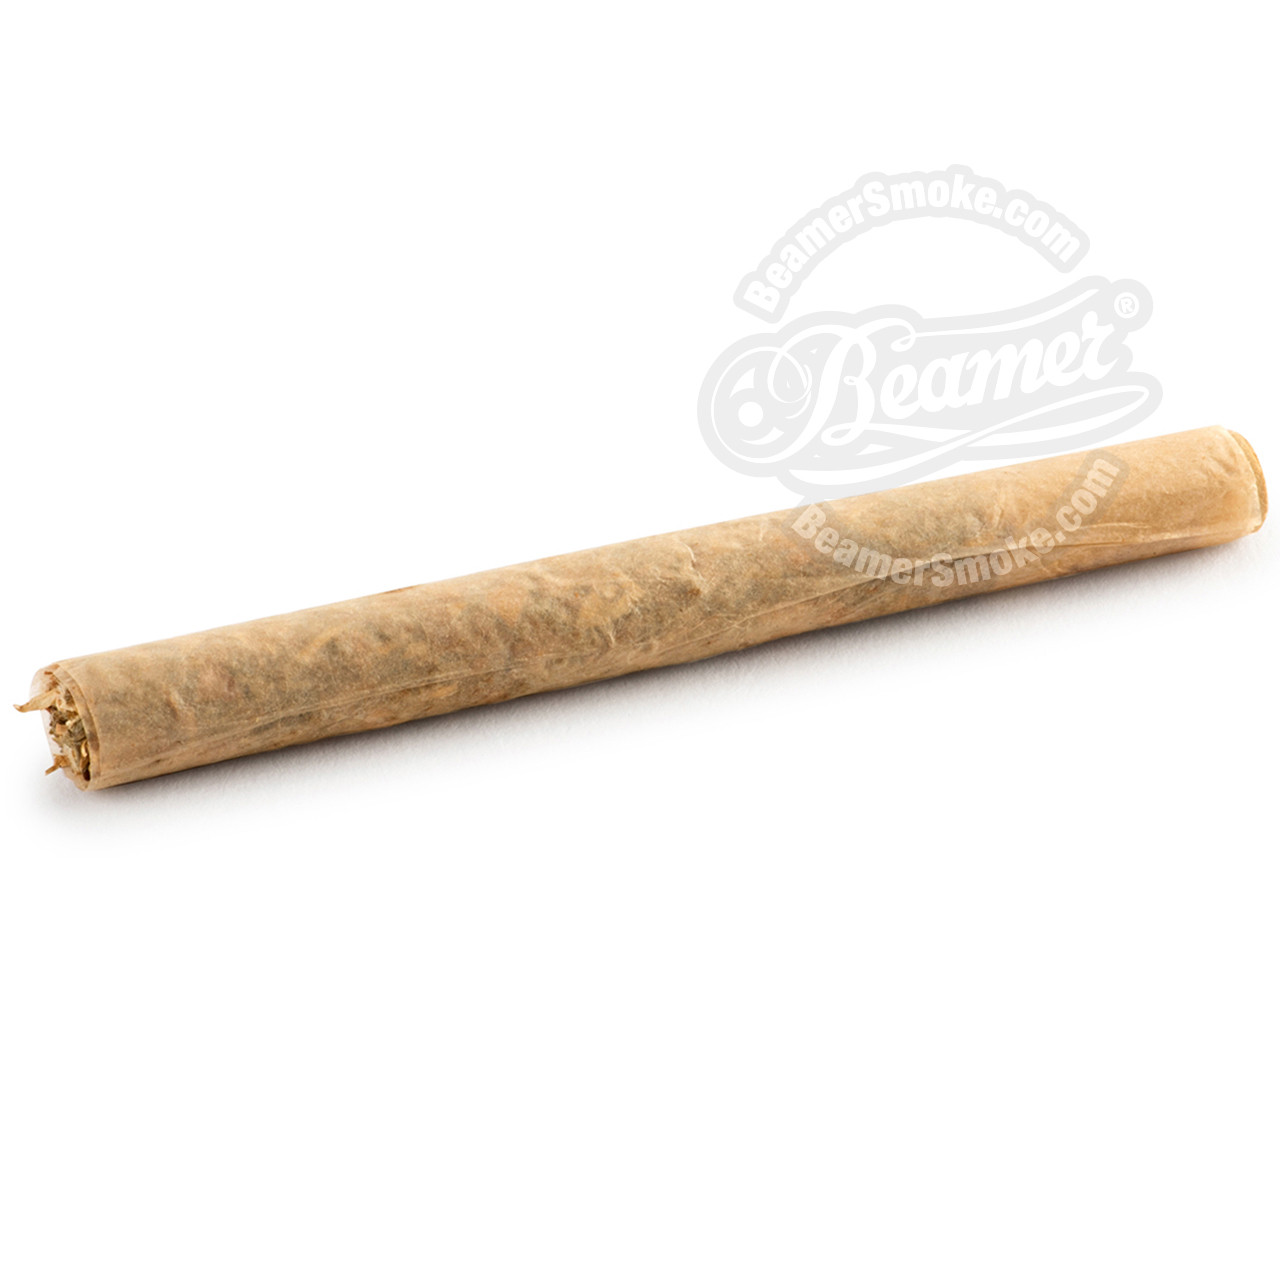 Pre-Rolled Filter Tips from Elements Rolling Papers